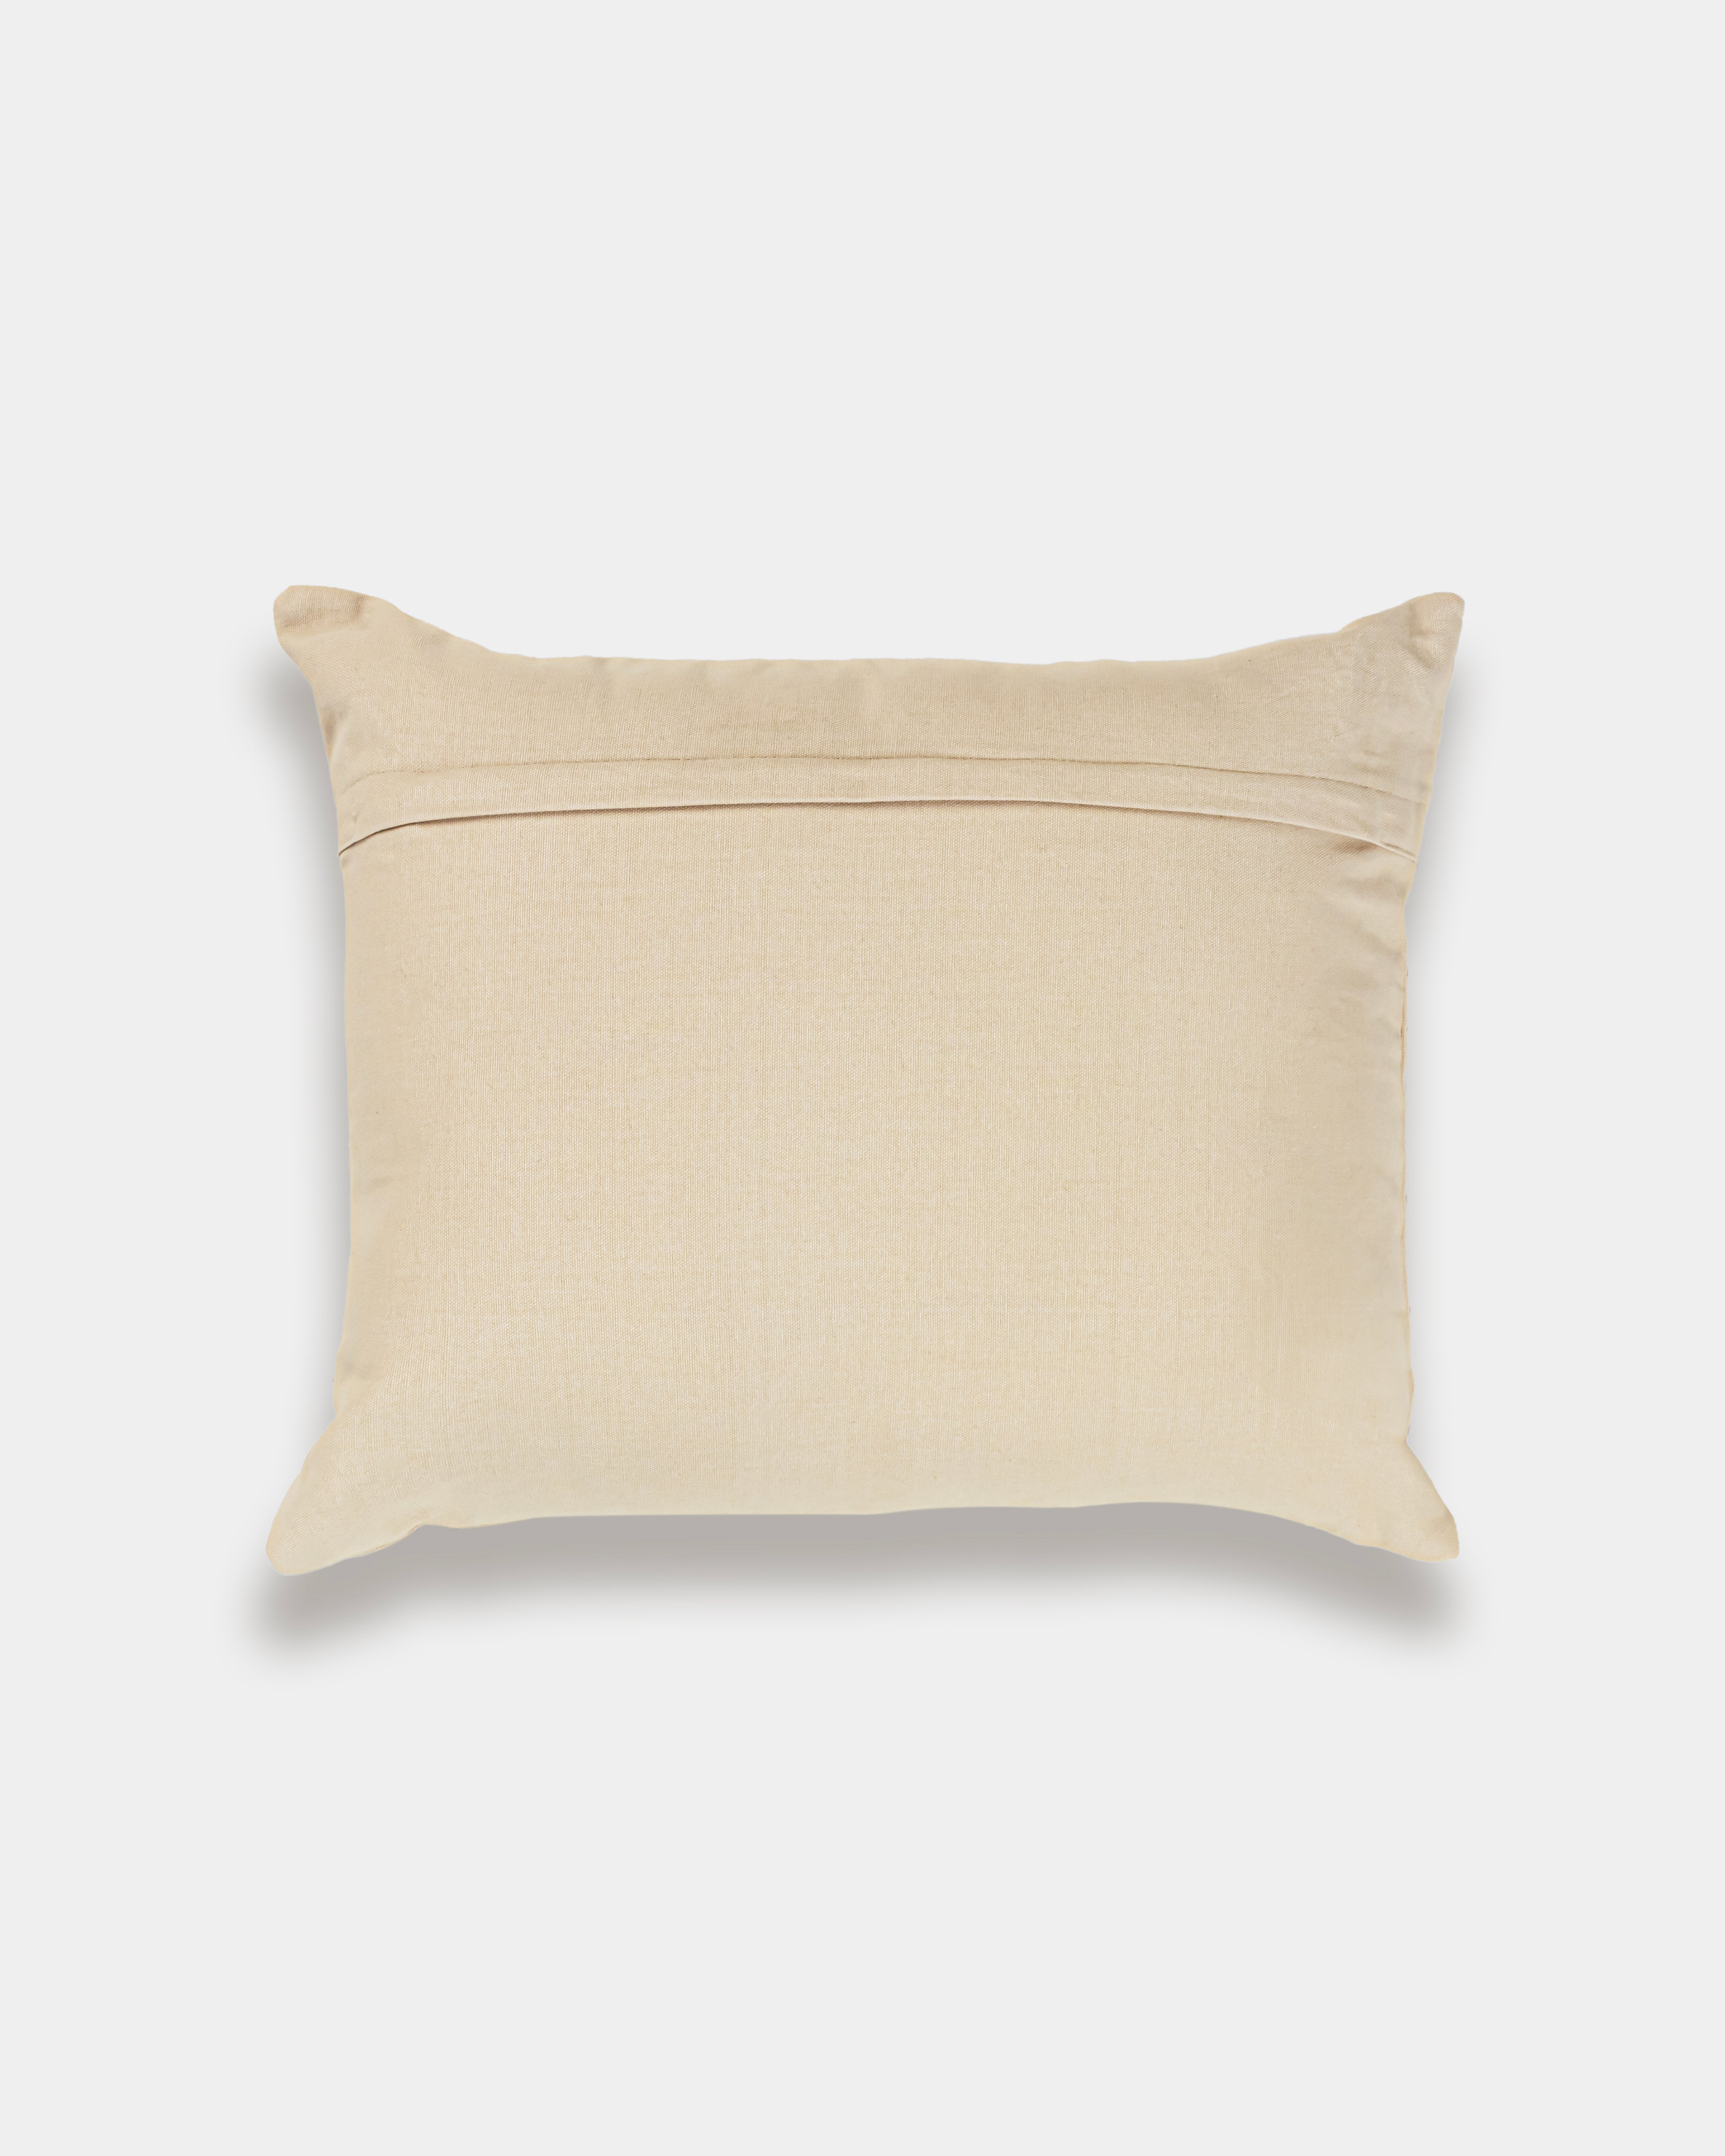 Suzani Pillow | White Pillow Cover Fauna 16x20" | Made in Jaipur